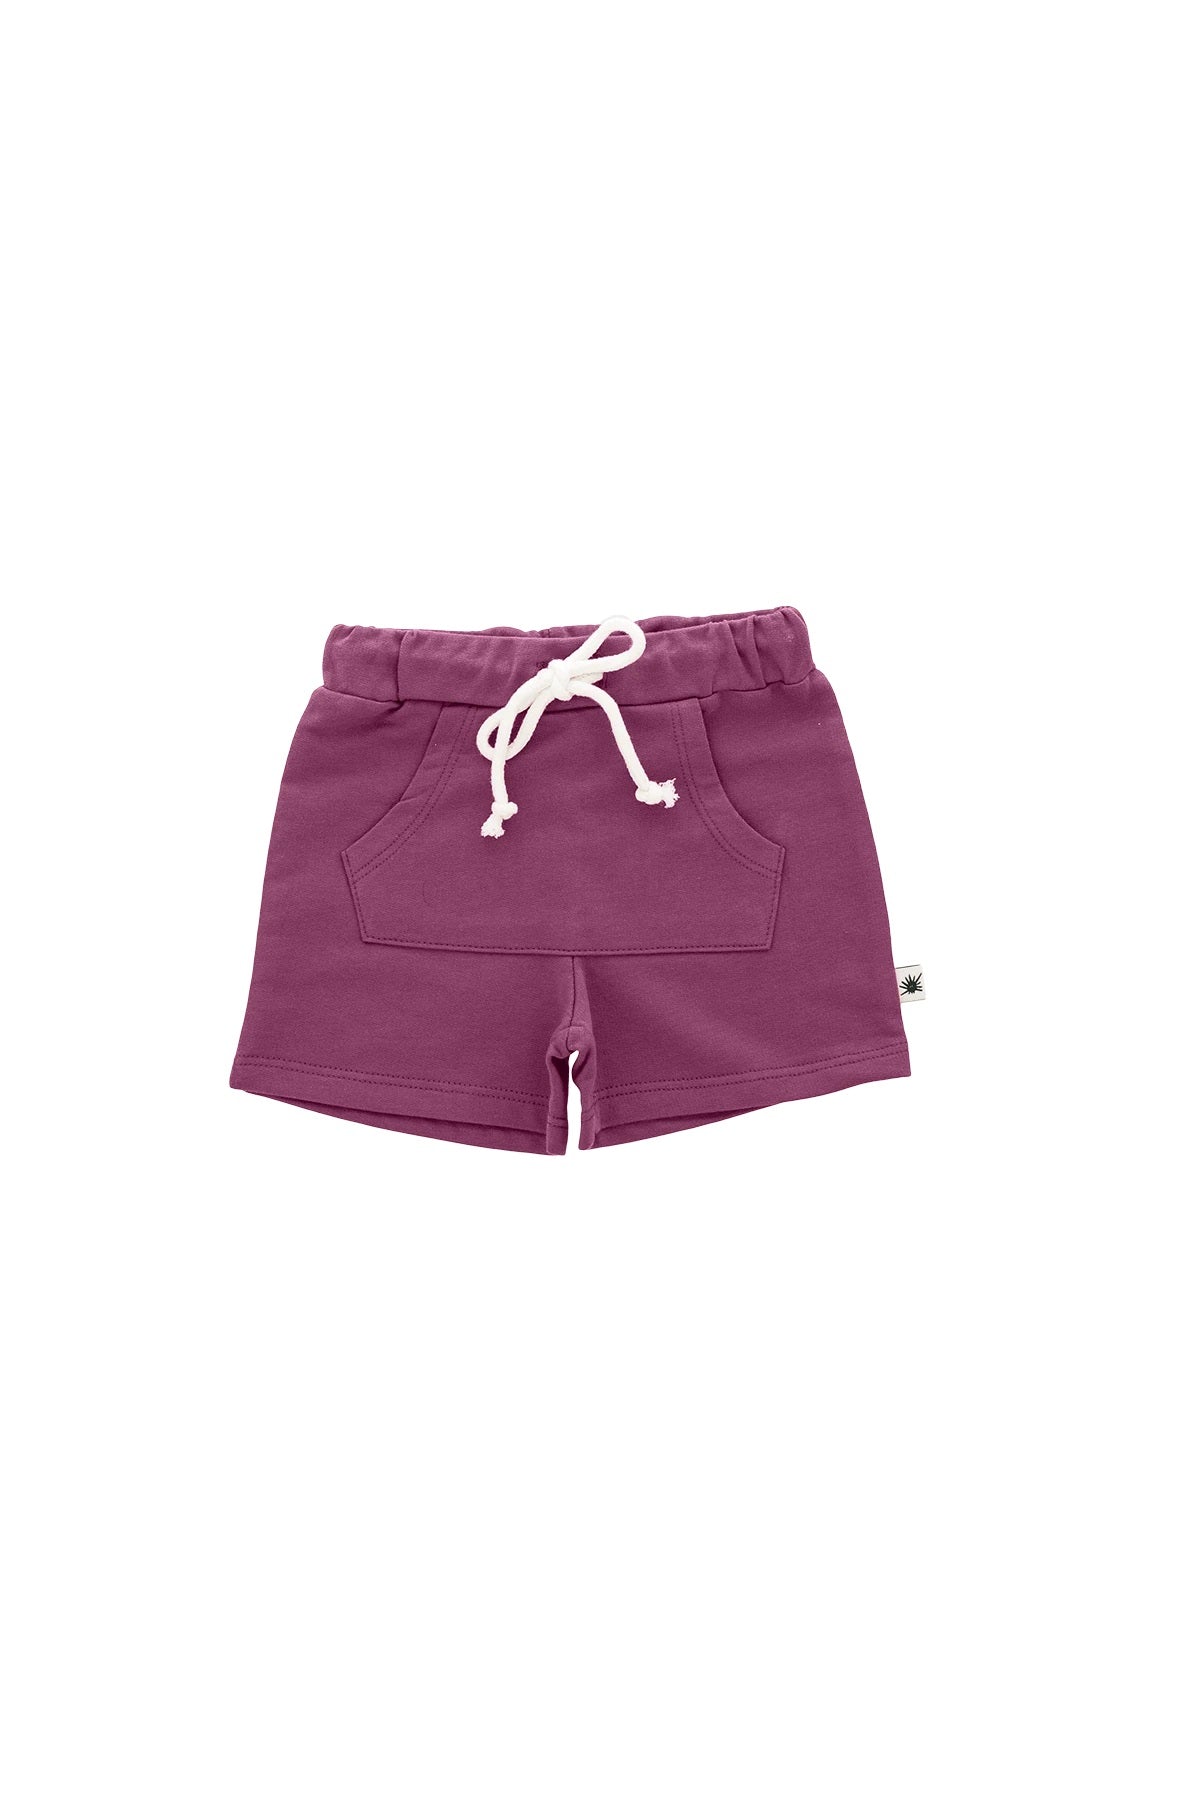 Organic cotton short for boys and girls